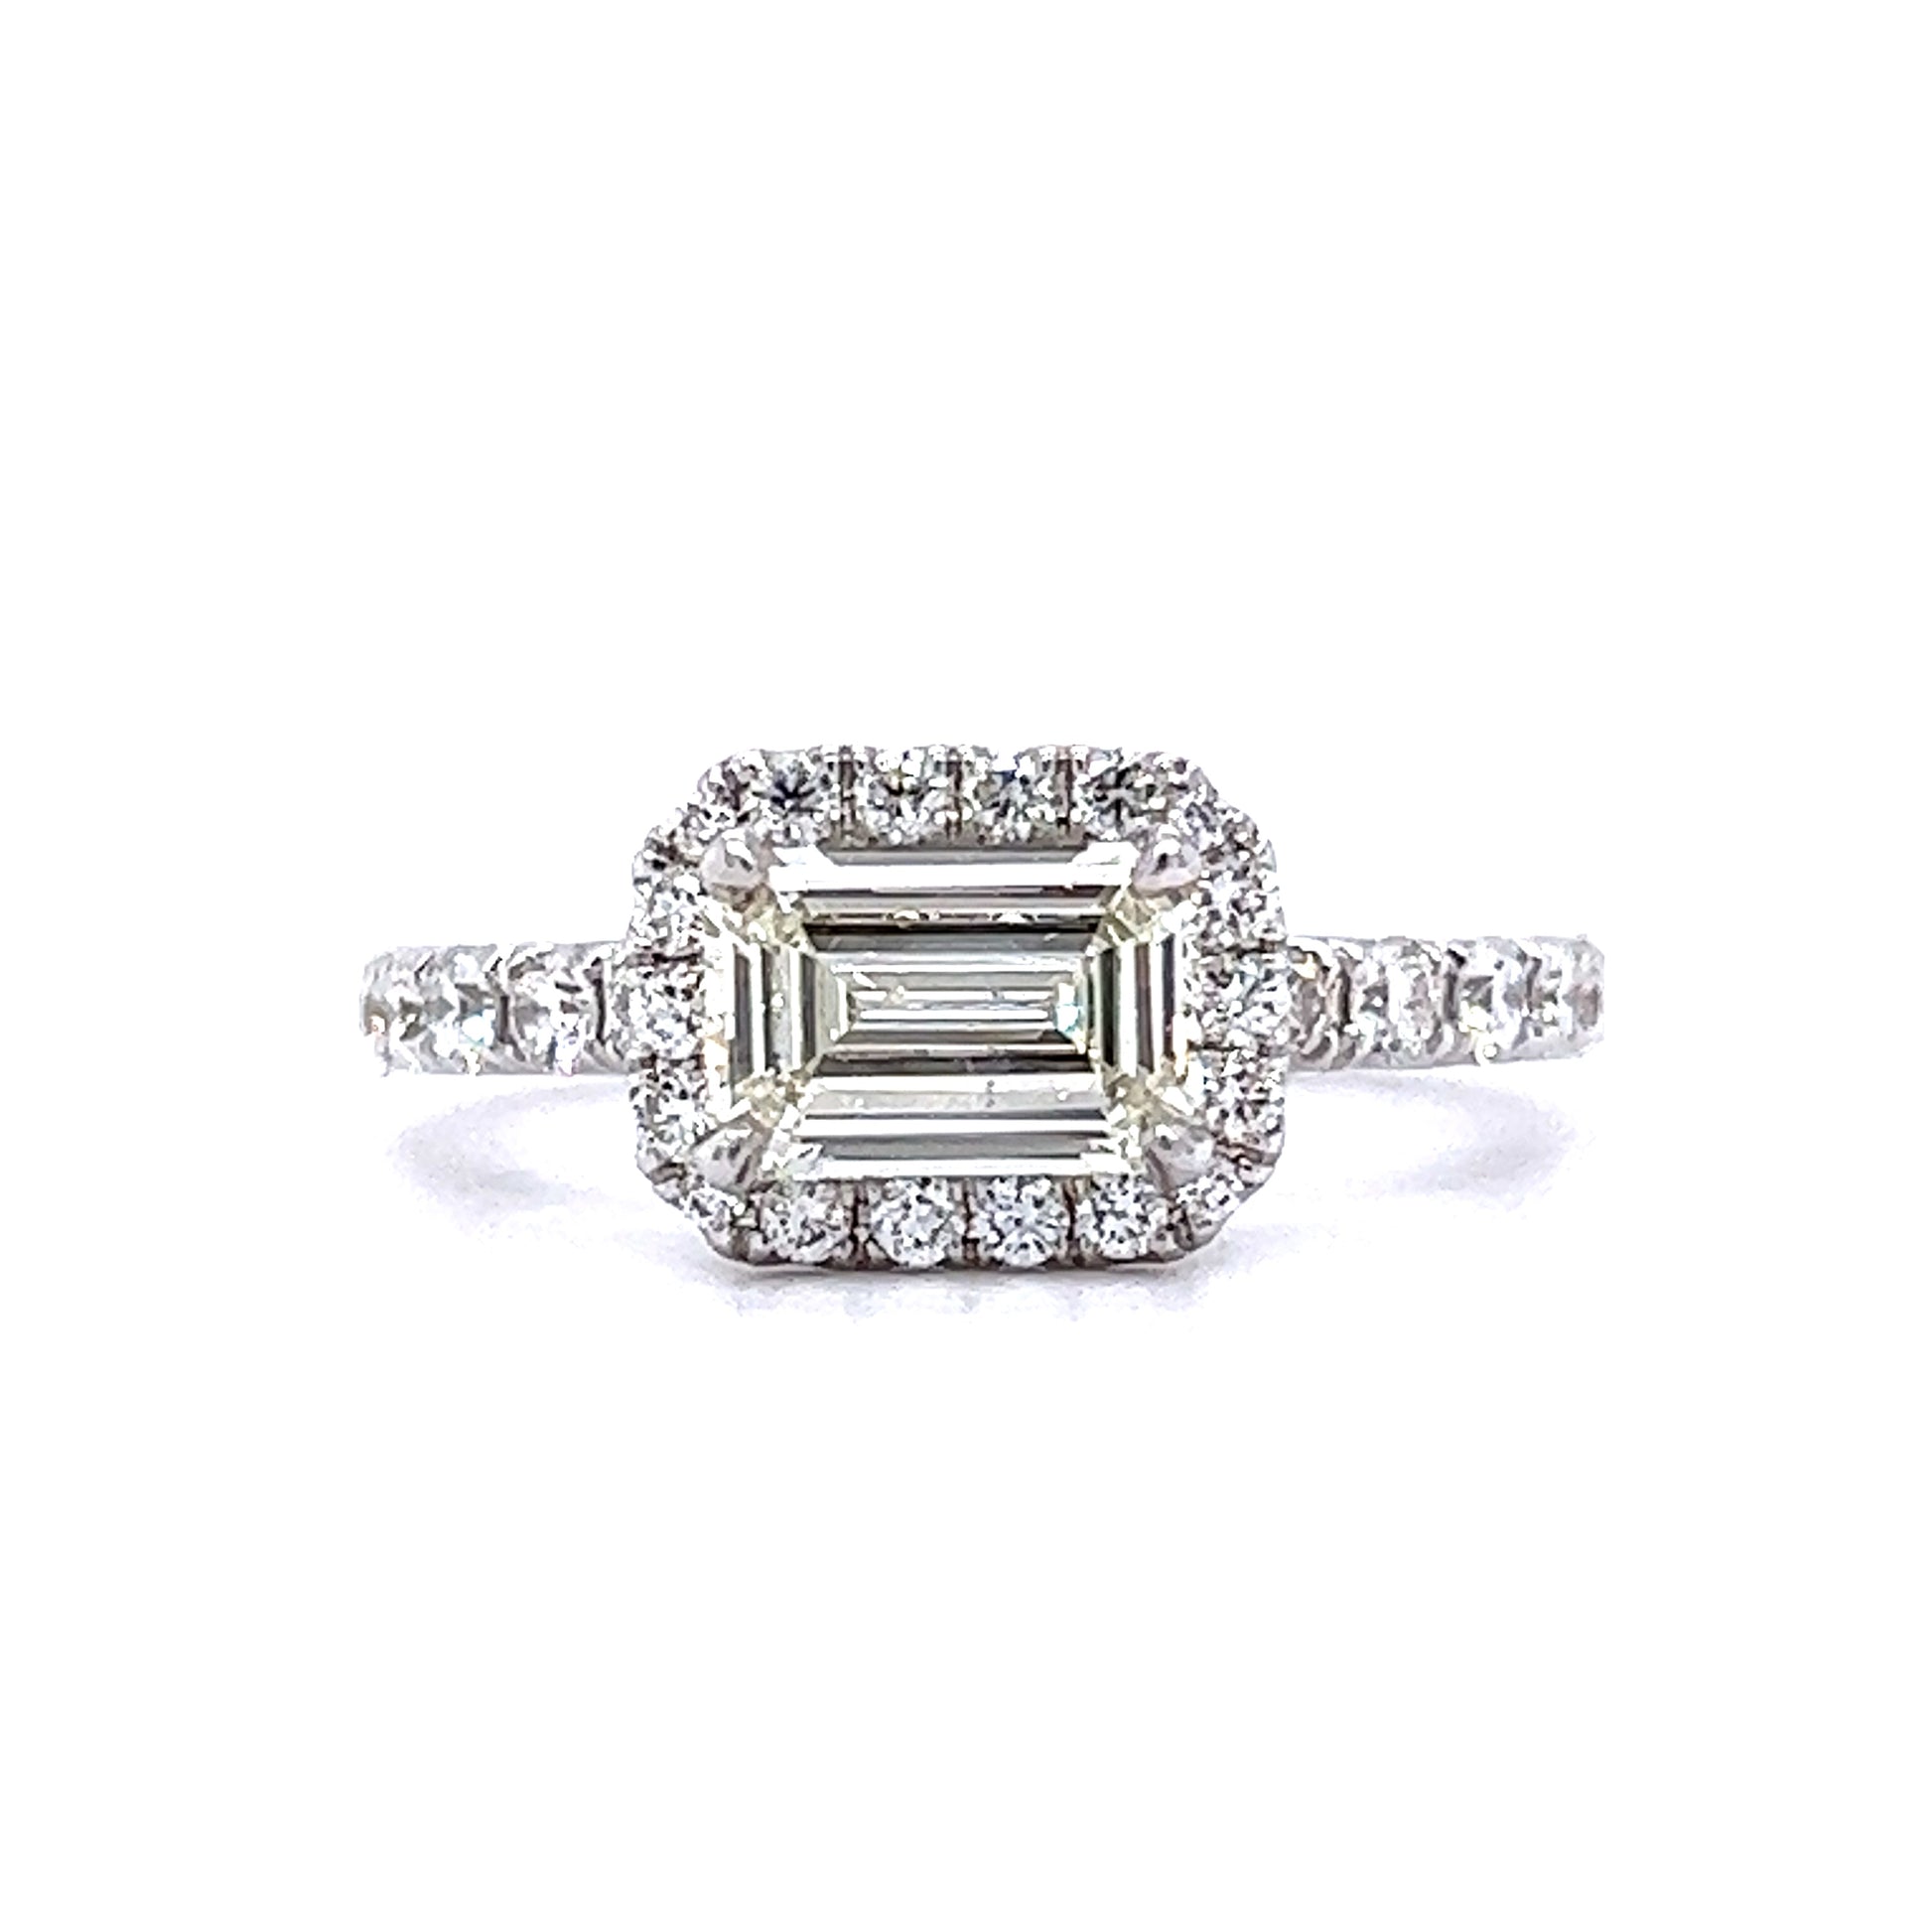 1.09 Emerald Cut Diamond Engagement Ring in 18k White Gold